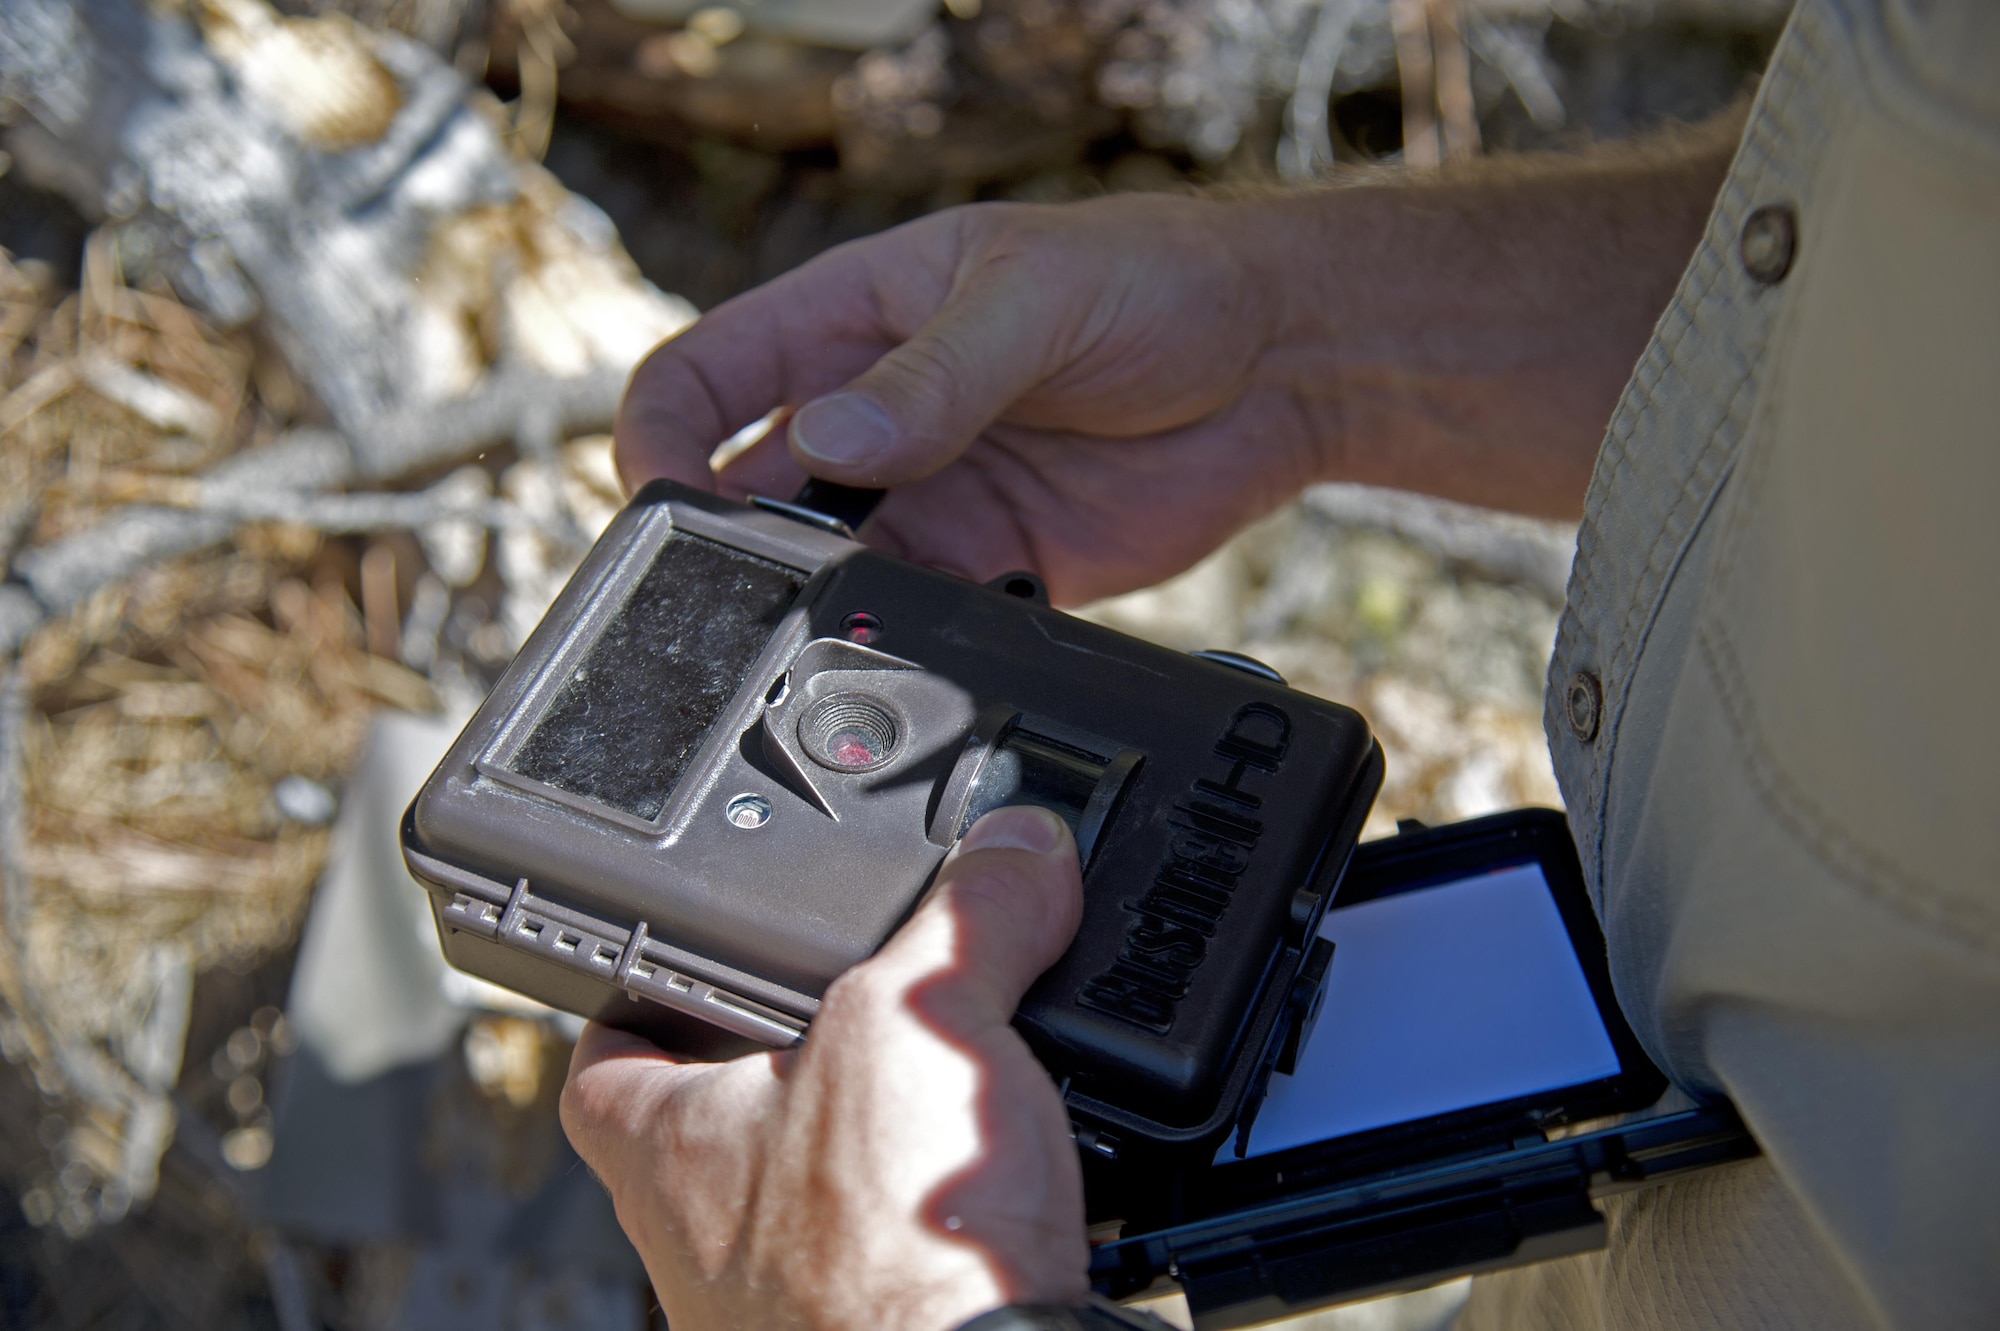 Todd Foster, the 336th Training Group training area manager, unlocks a case containing a trail camera July 29, 2015, at Colville National Forest, Wash. Foster assists the U.S. Forest Service and the U.S. Air Force Survival School by tracking animals within the school training area. (U.S. Air Force photo/Airman 1st Class Nicolo J. Daniello)